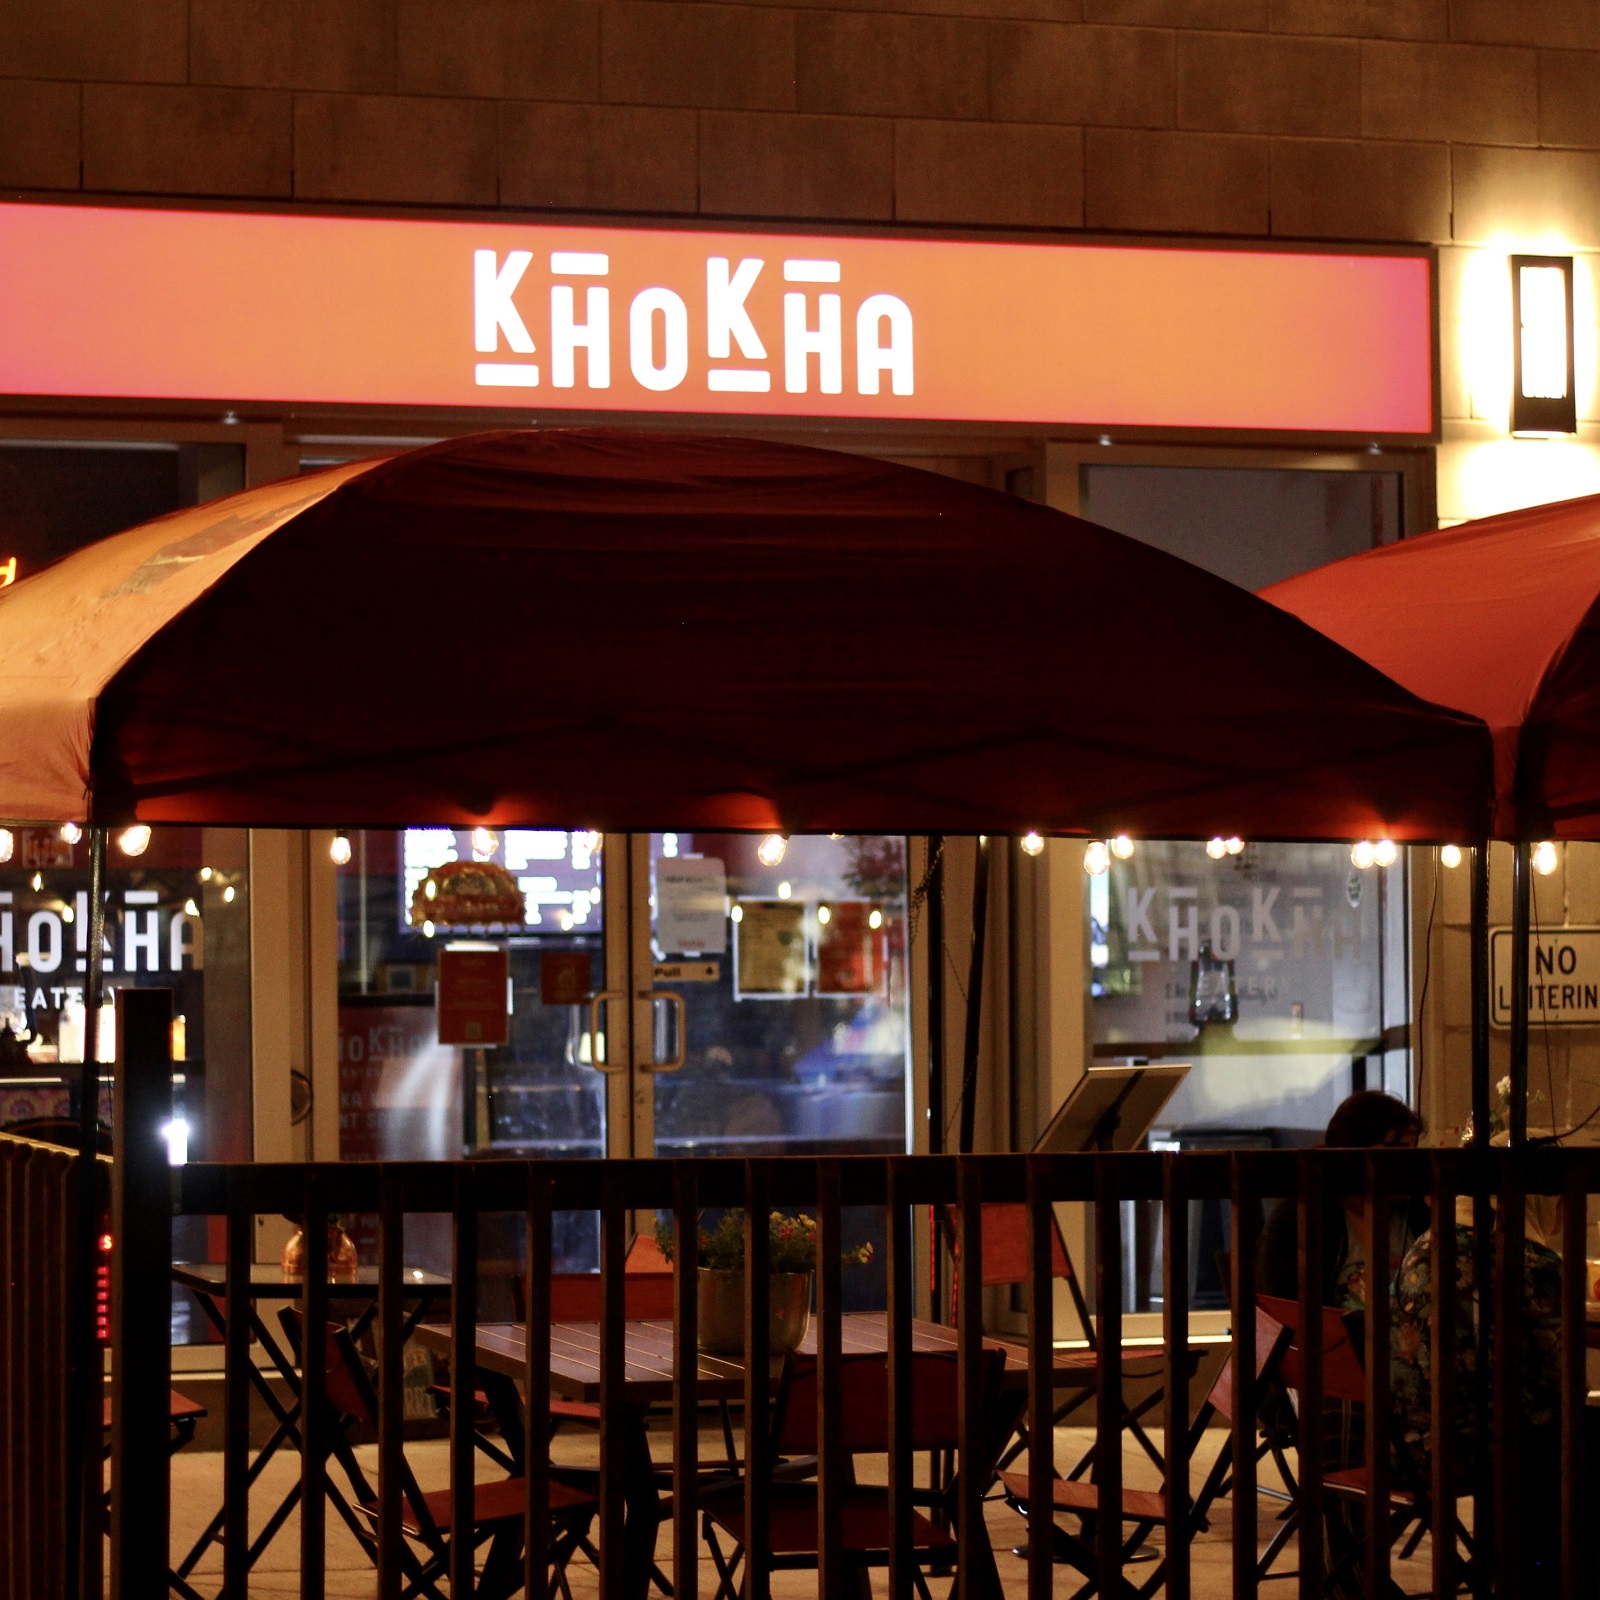 Khokha Eatery’s outdoor dining